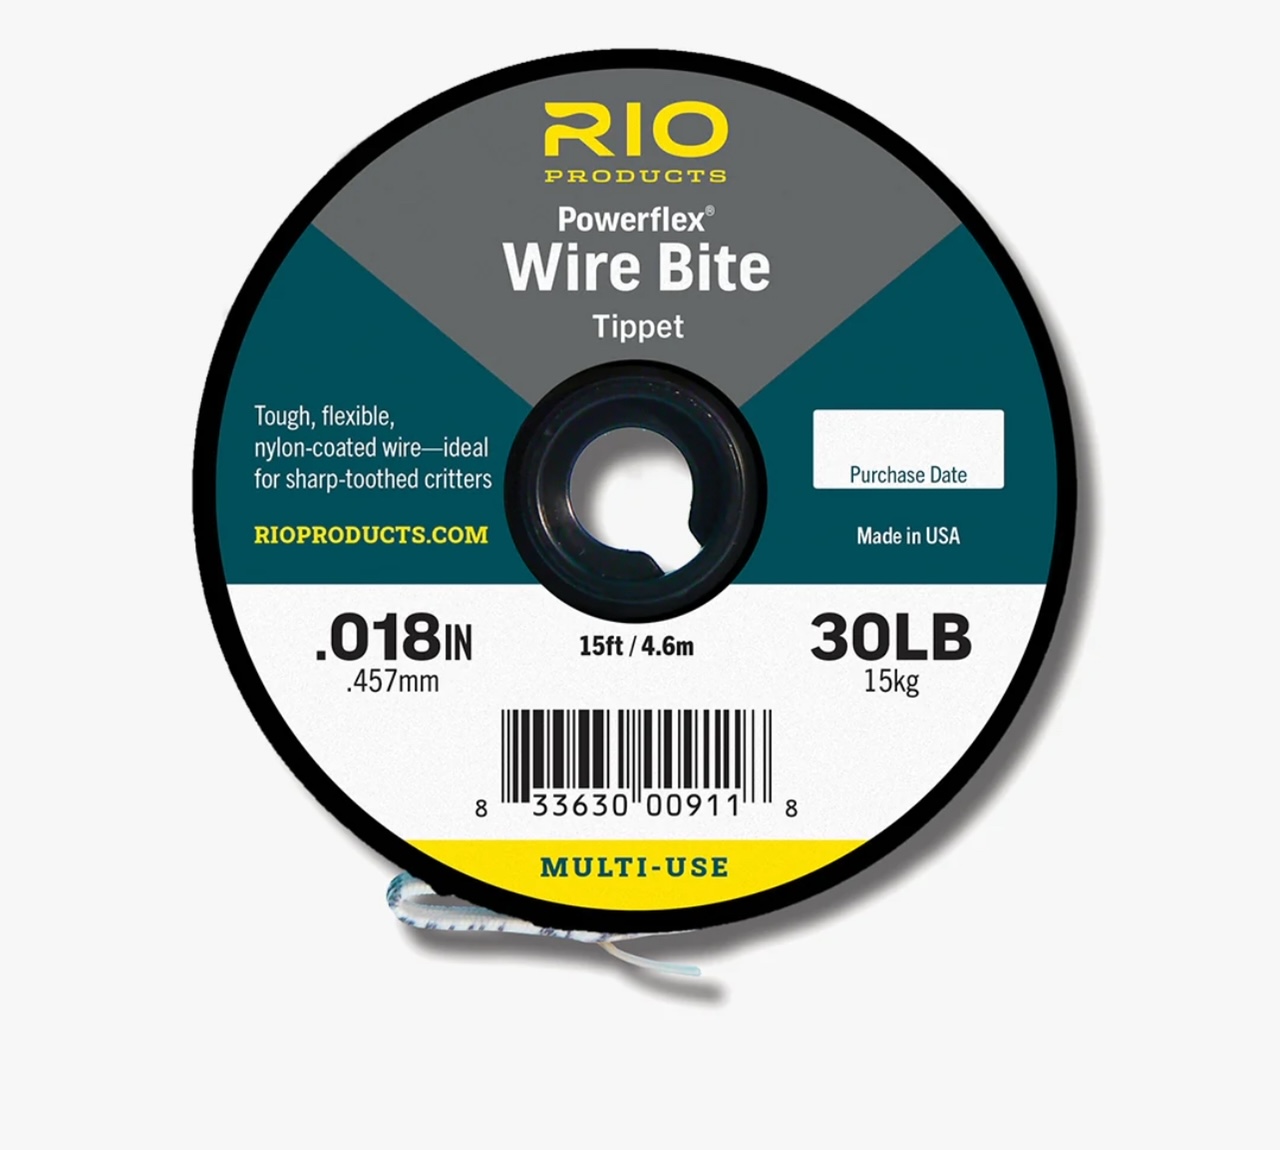 Rio Products Powerflex Wire Bite Tippet